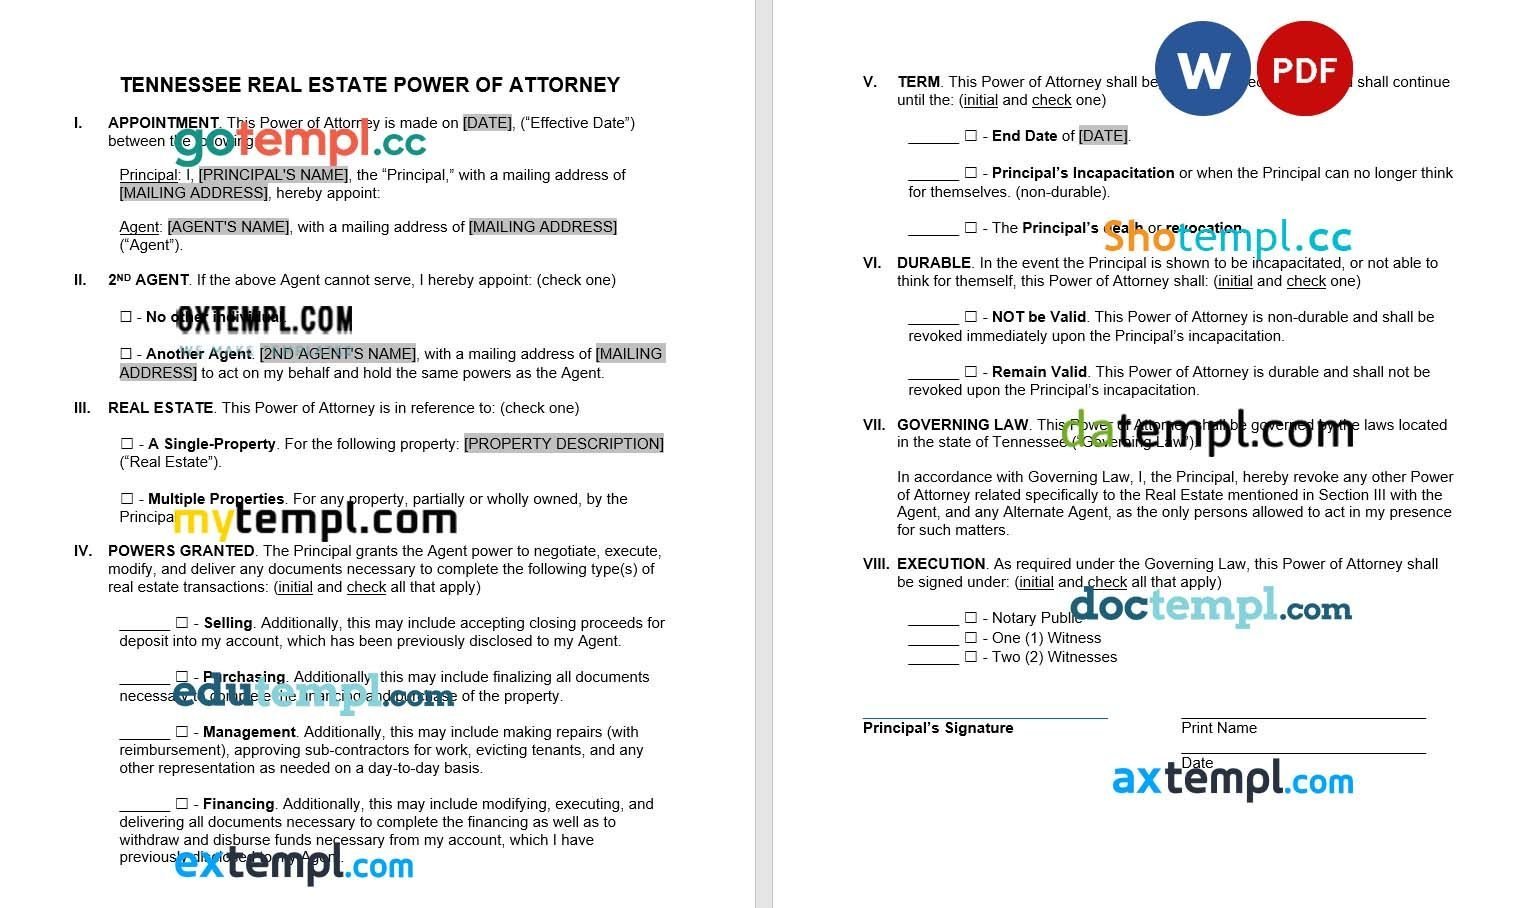 Property Power of Attorne example, fully editable